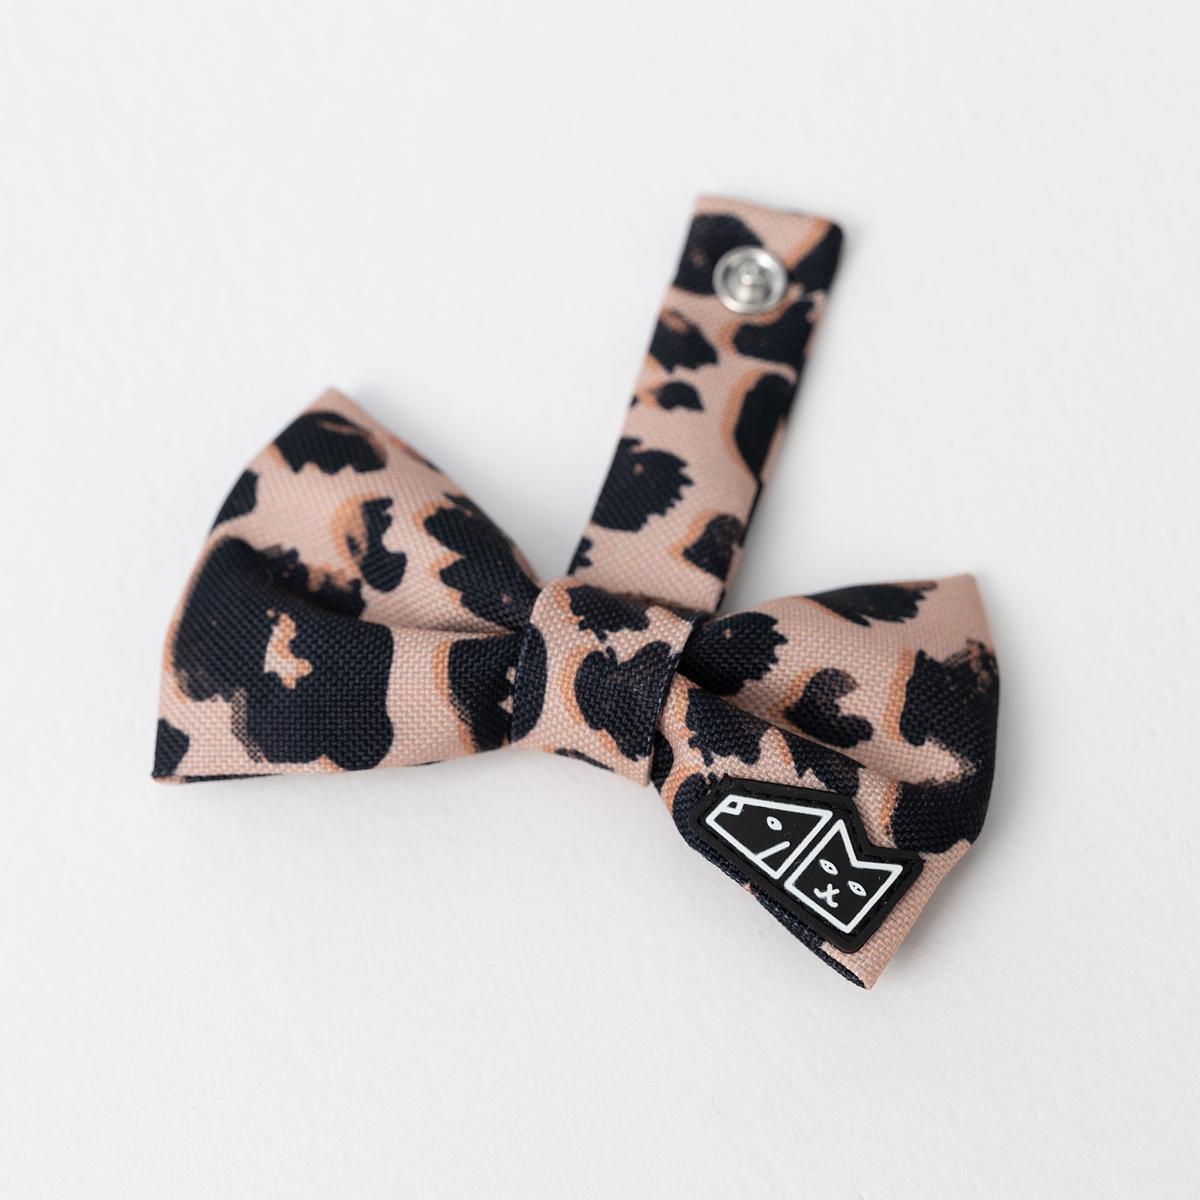 Bow tie "Respect the wildness" 